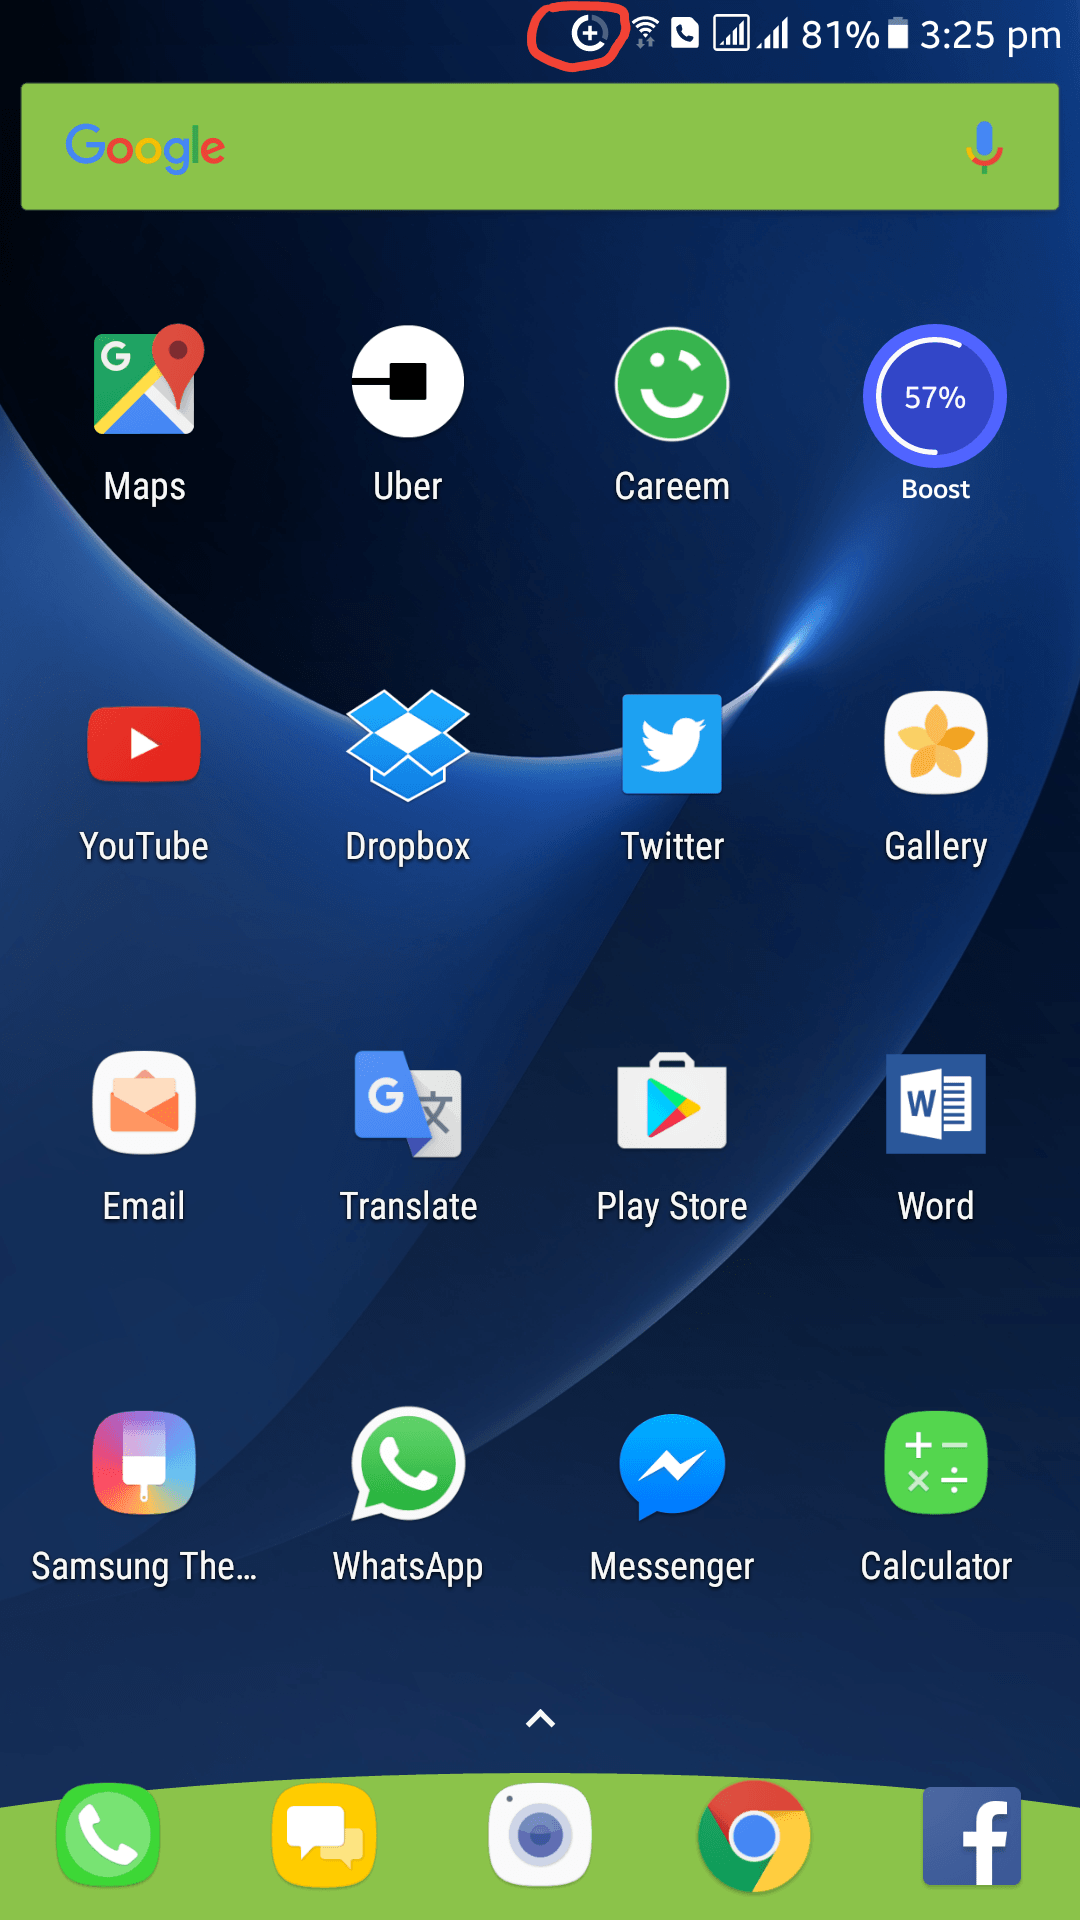 Broken Blue Circle Logo - samsung - Meaning of 3/4 broken circle icon? - Android Enthusiasts ...